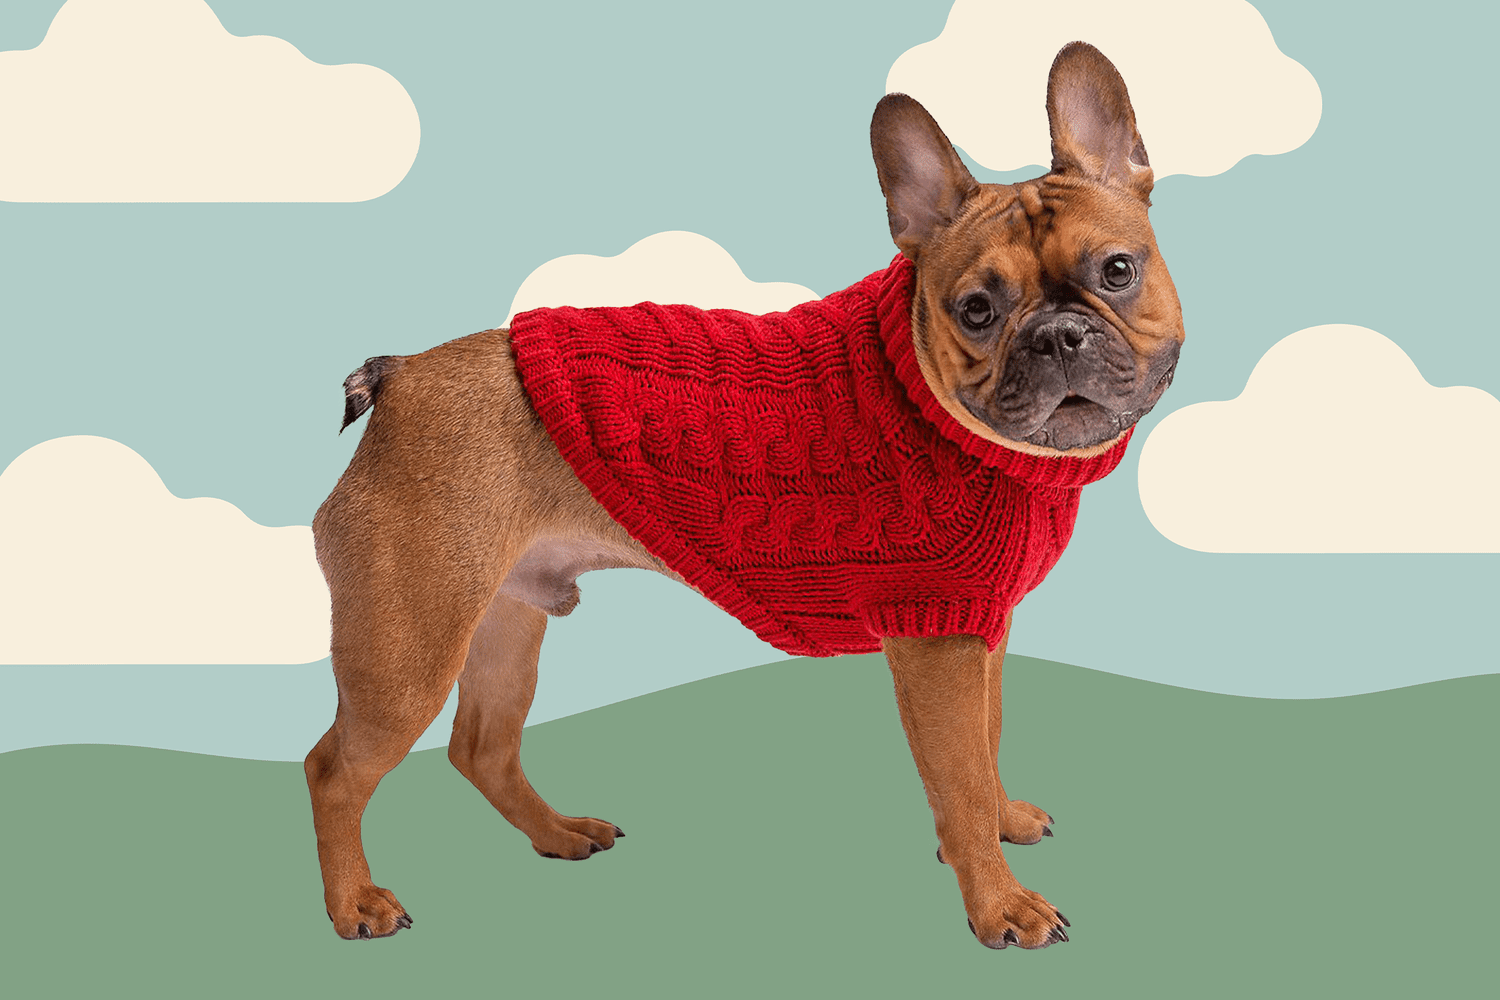 ubest Pet Sweater Warm Jumper Dog Cat Twist Striped Sweater Coat in Autumn Early Winter Puppy Jacket Dogs Clothes Brown L